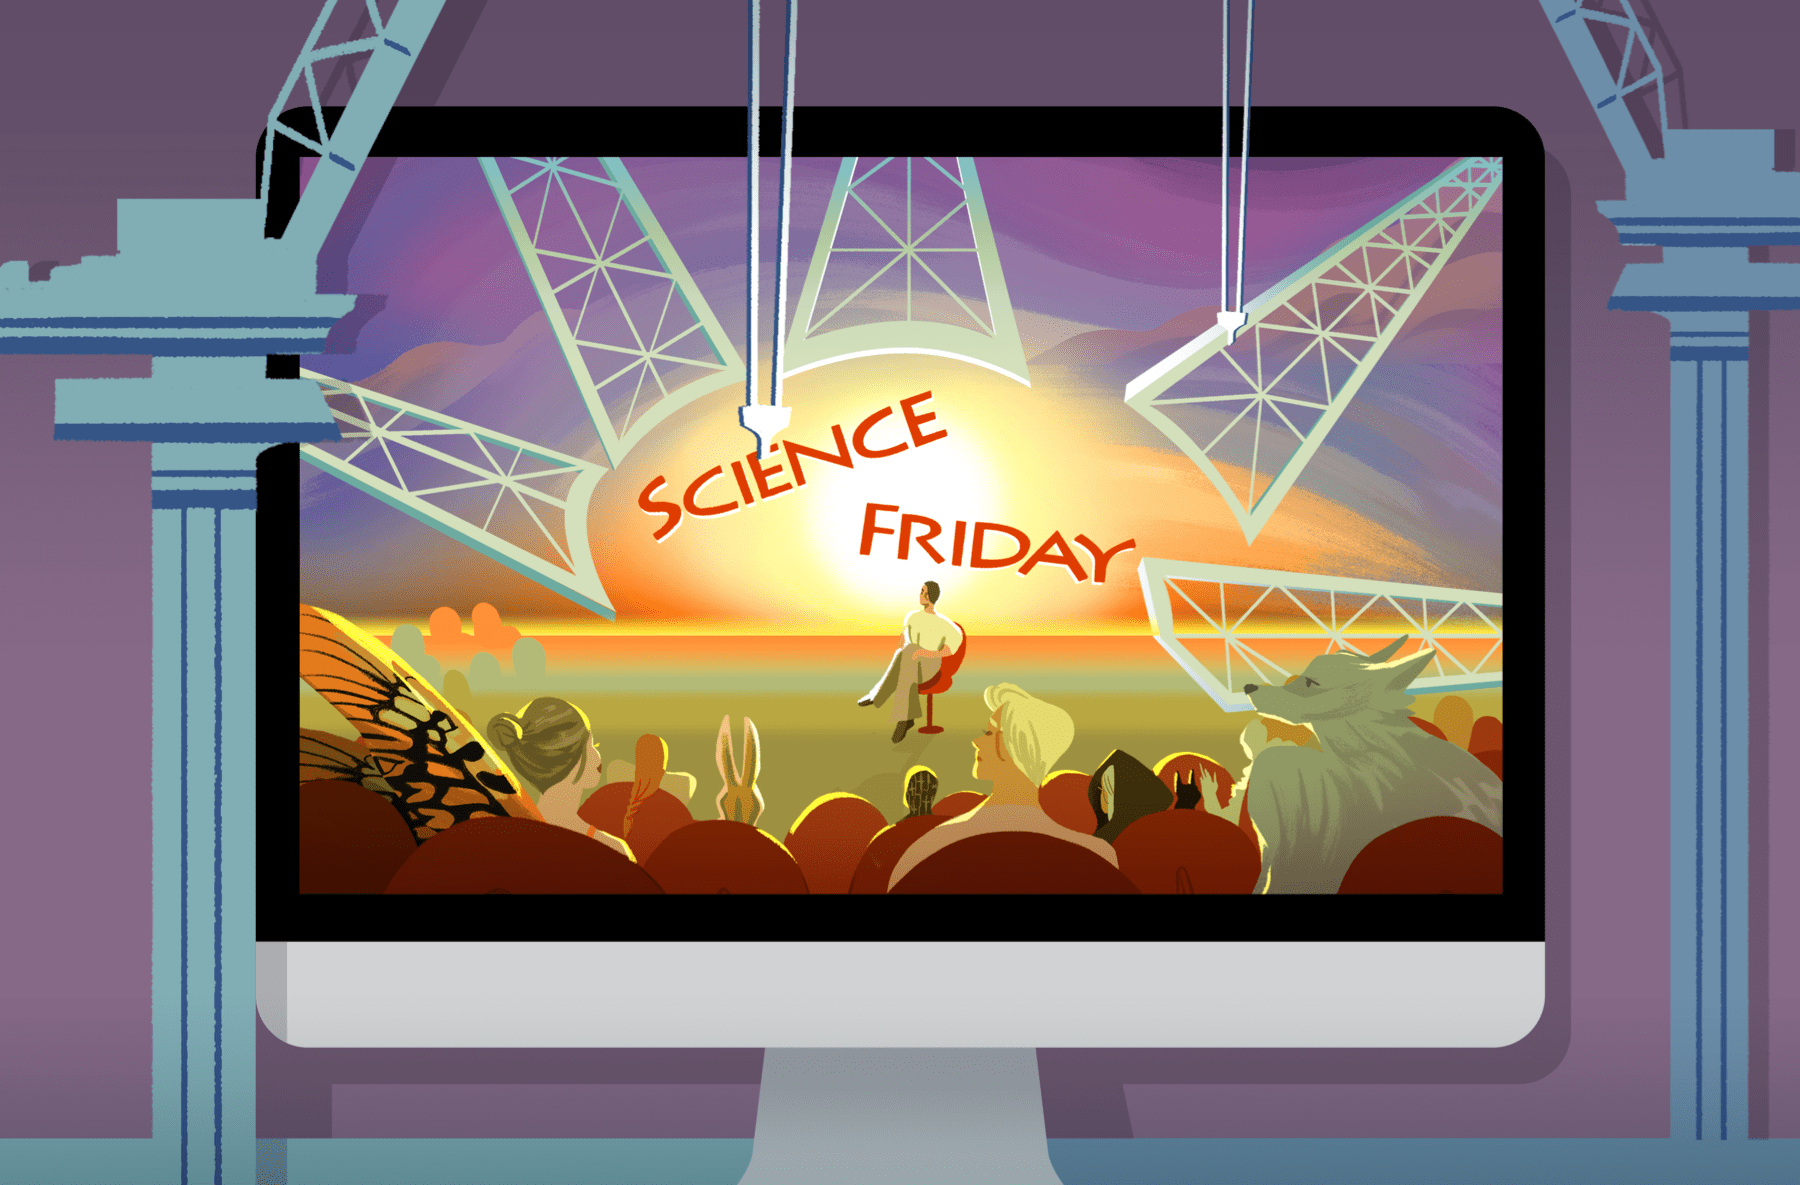 an illustration of tiny cranes next to a computer screen reaching into the screen to disassemble a giant star-like structure that says science friday in the center, in a grassy field. below the sign is a man sitting in a chair and he is surrounded by people sitting in chairs, some fairies, a werewolf, and a rabbit